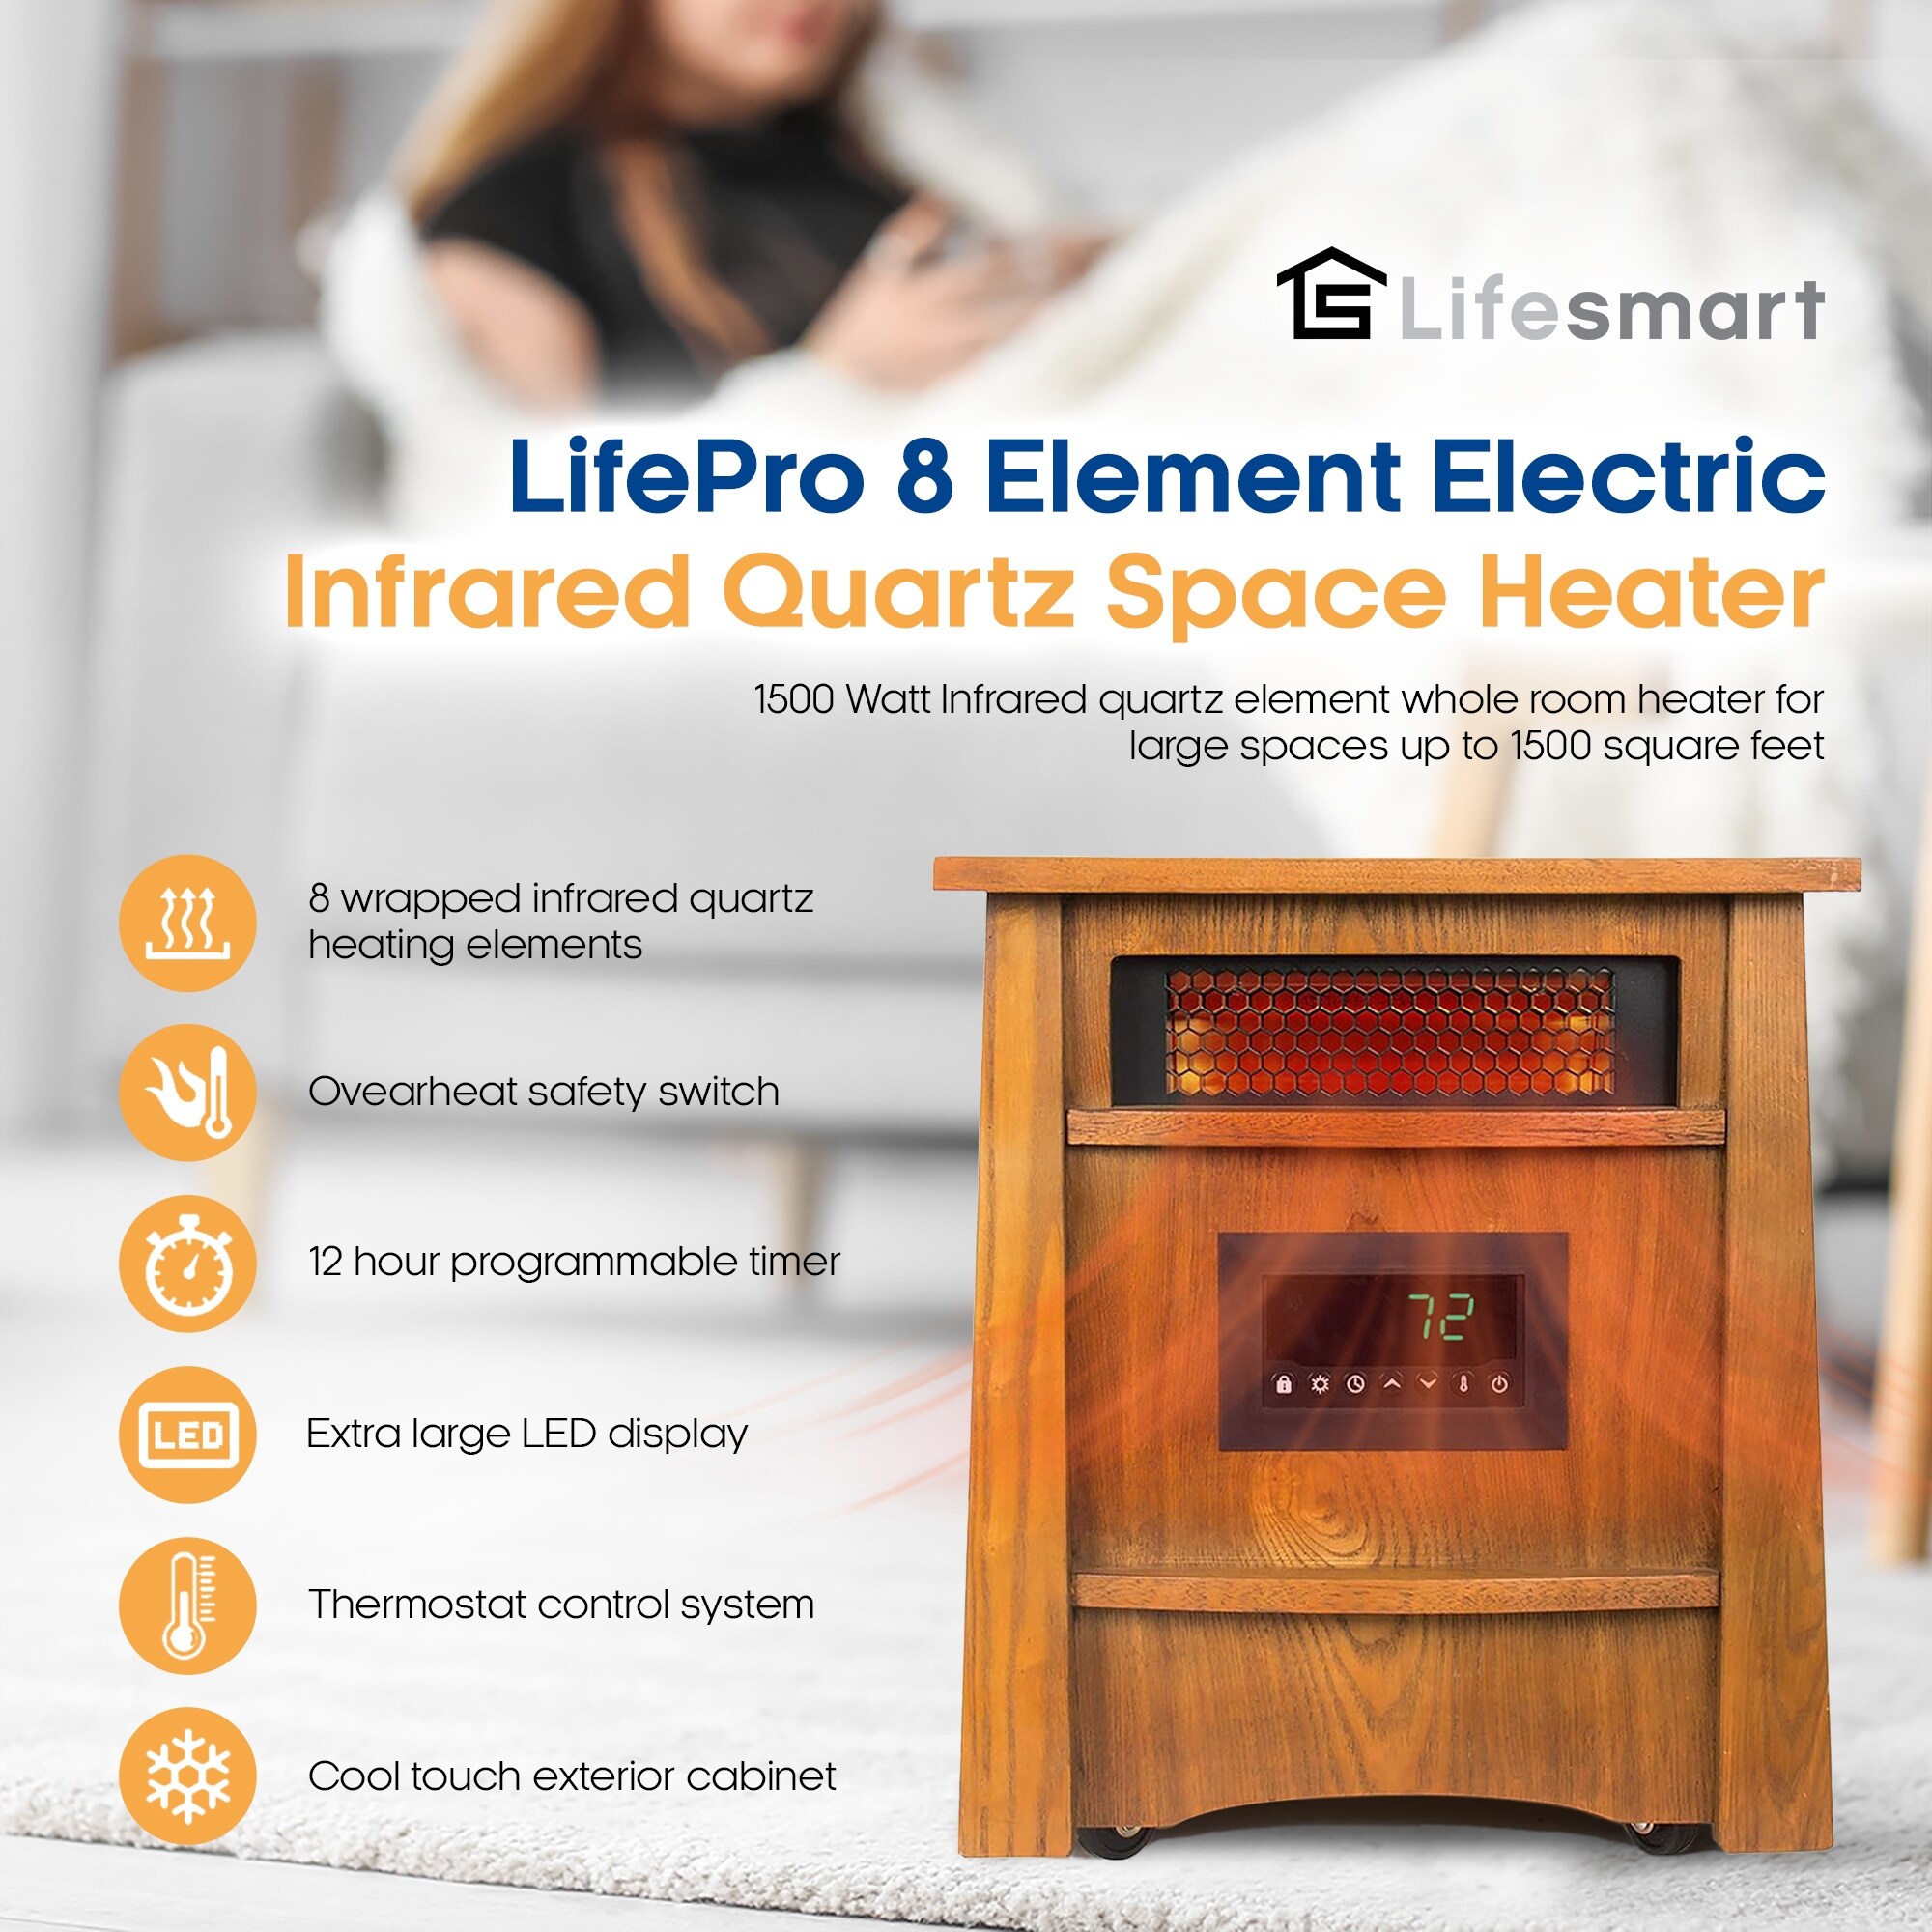 https://ak1.ostkcdn.com/images/products/is/images/direct/a3a2bd15e93ea2ef675676ca6d68e15f7288859f/LifeSmart-LifePro-8-Element-1500W-Electric-Infrared-Quartz-Indoor-Space-Heater.jpg